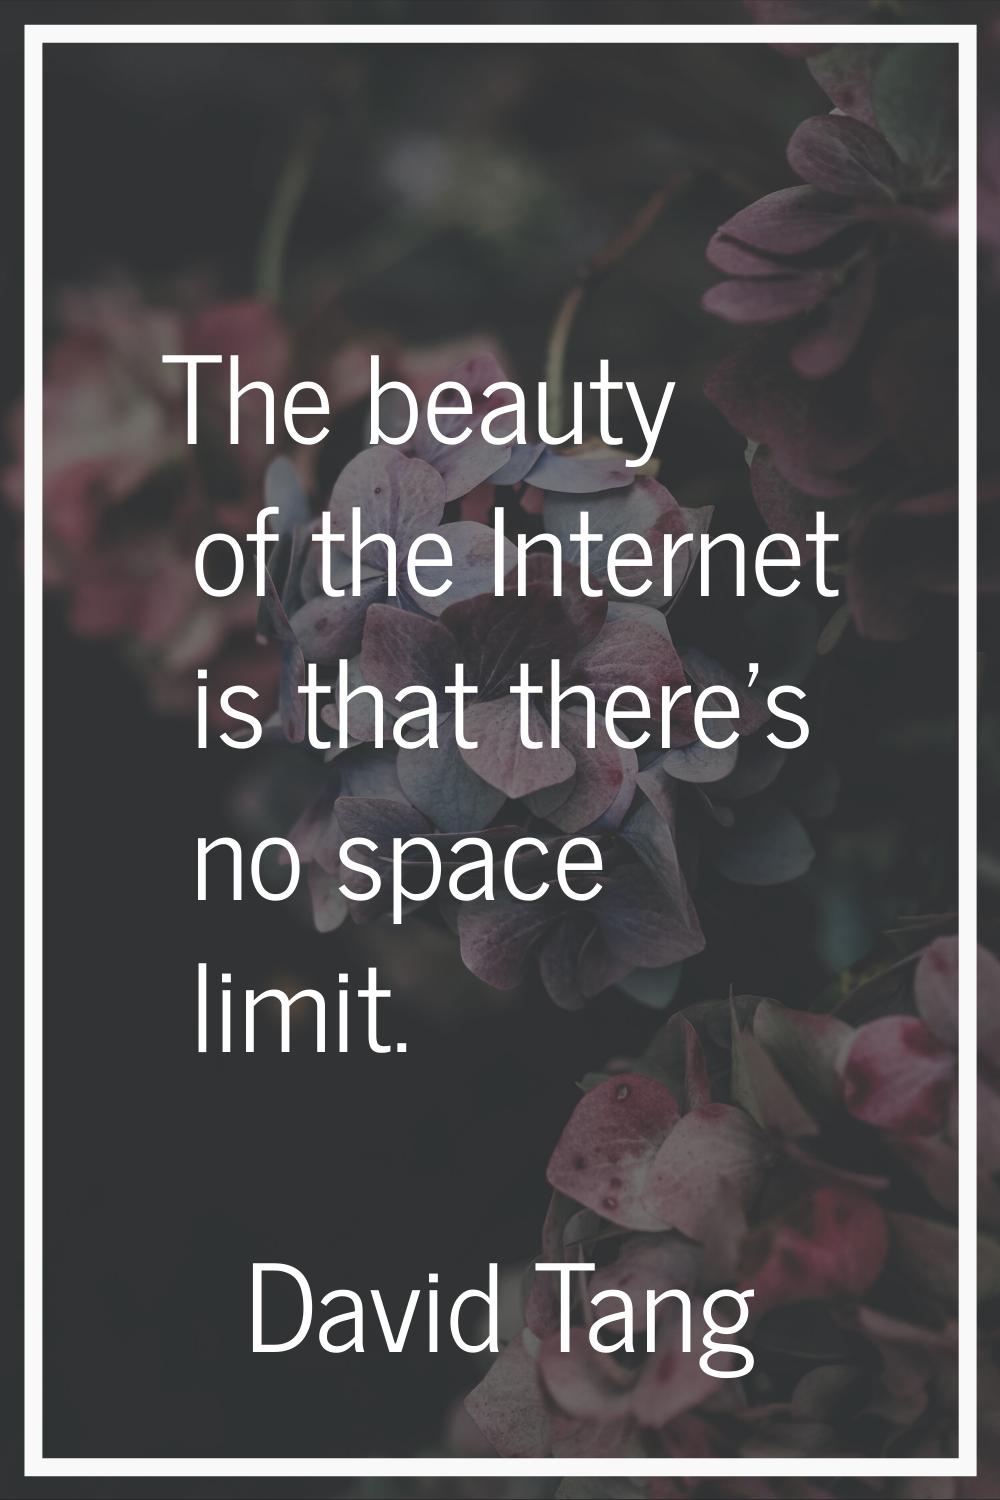 The beauty of the Internet is that there's no space limit.